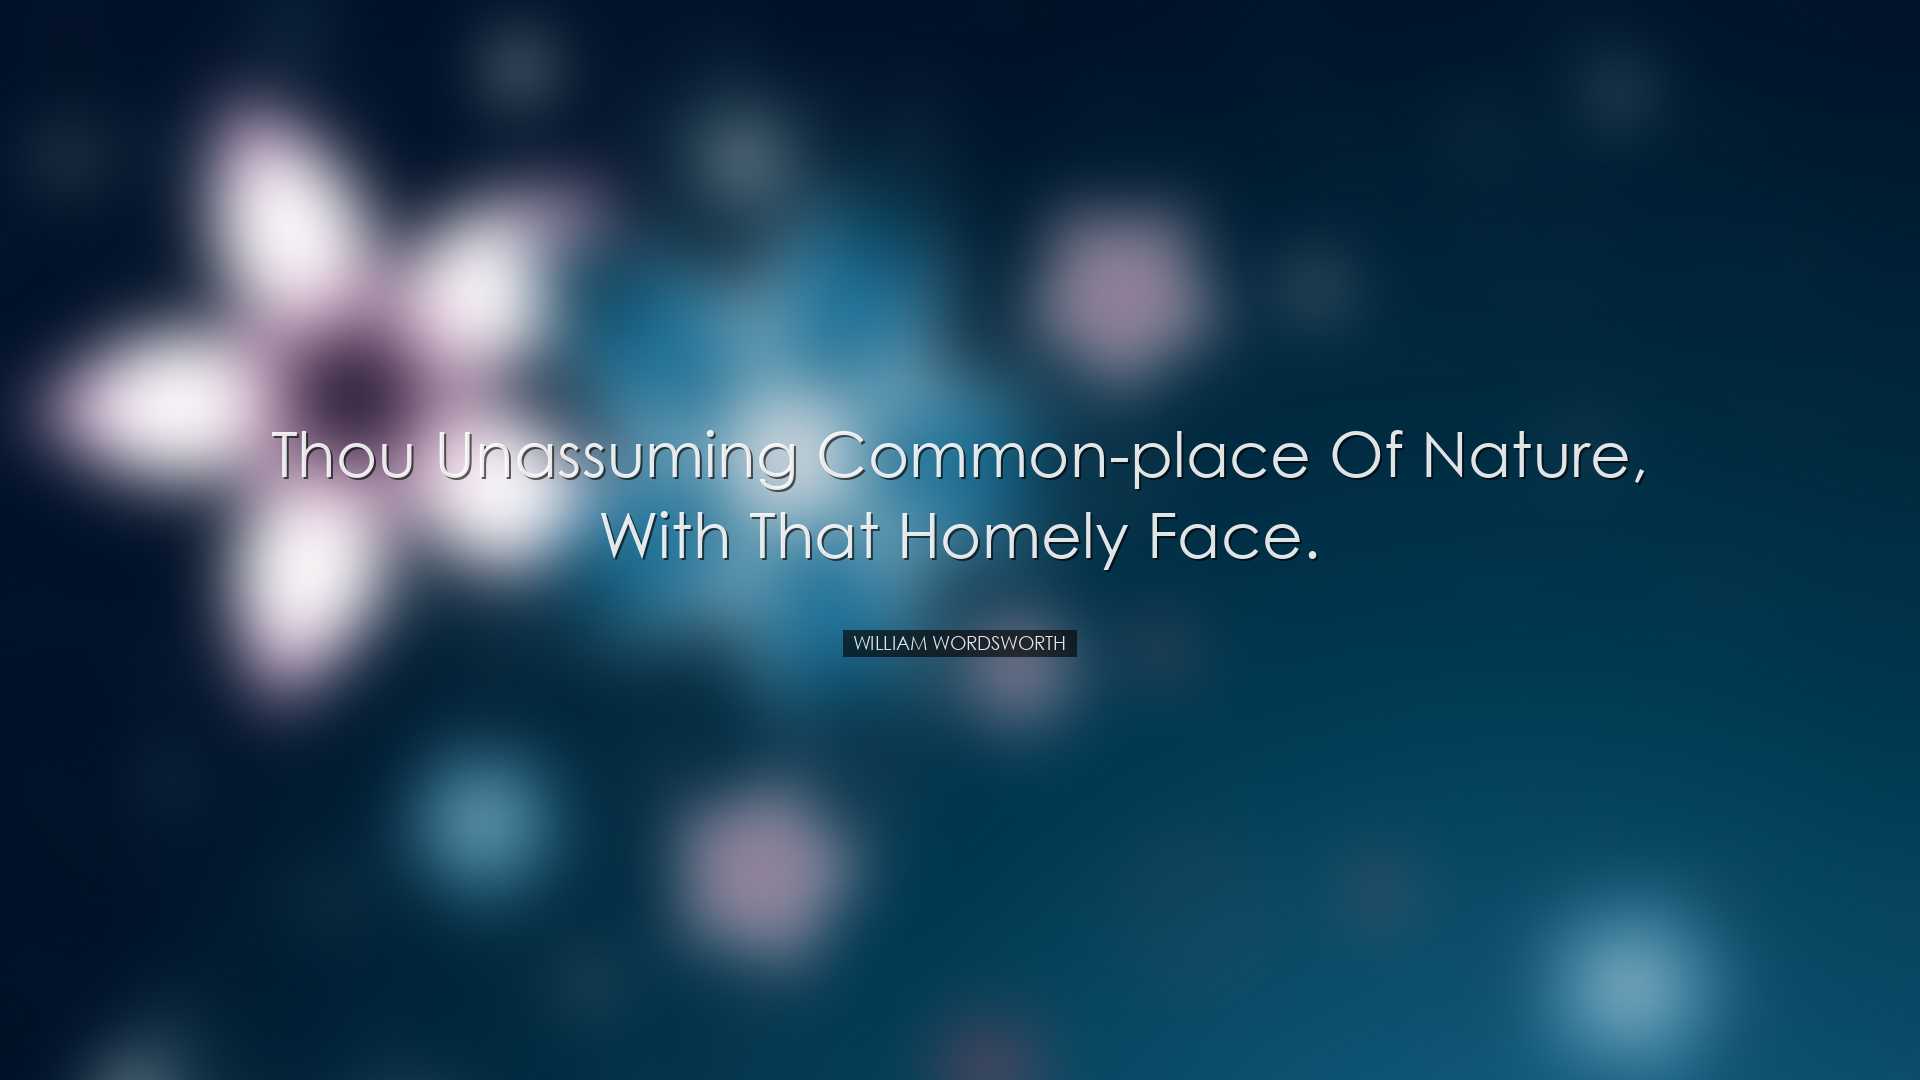 Thou unassuming common-place of Nature, with that homely face. - W